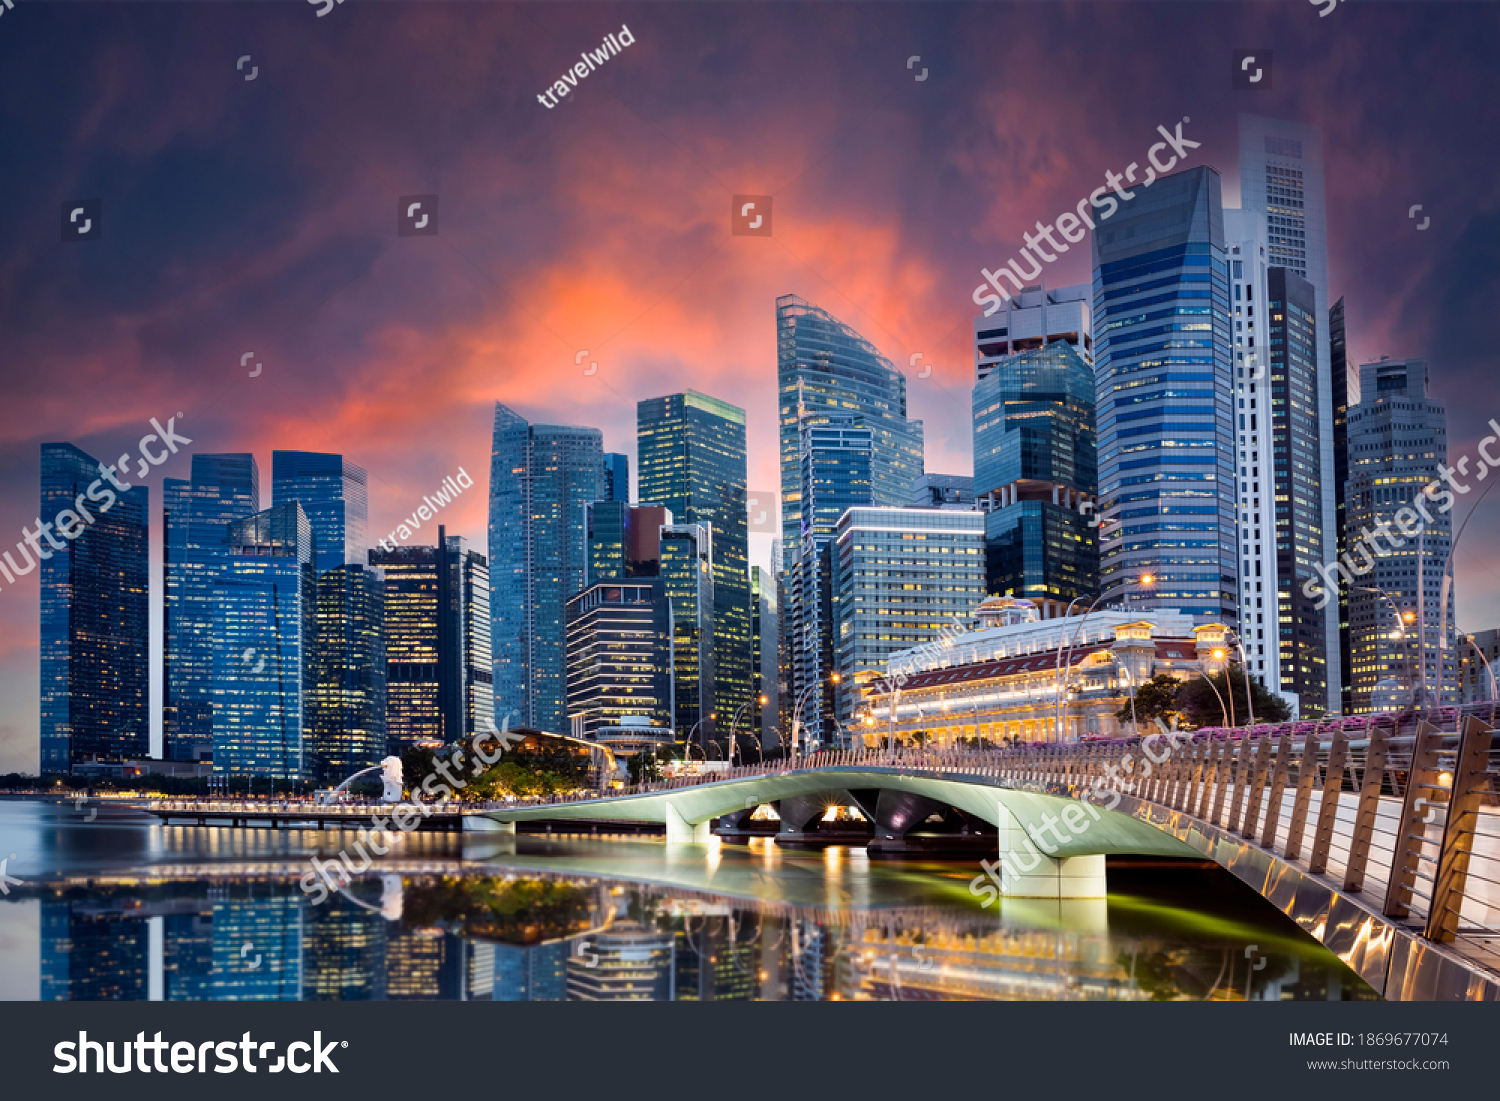 Stunning view of the Singapore’s skyline illuminated at sunset during the Covid-19 pandemic. Singapore is a sovereign island city-state in maritime Southeast Asia. #1869677074